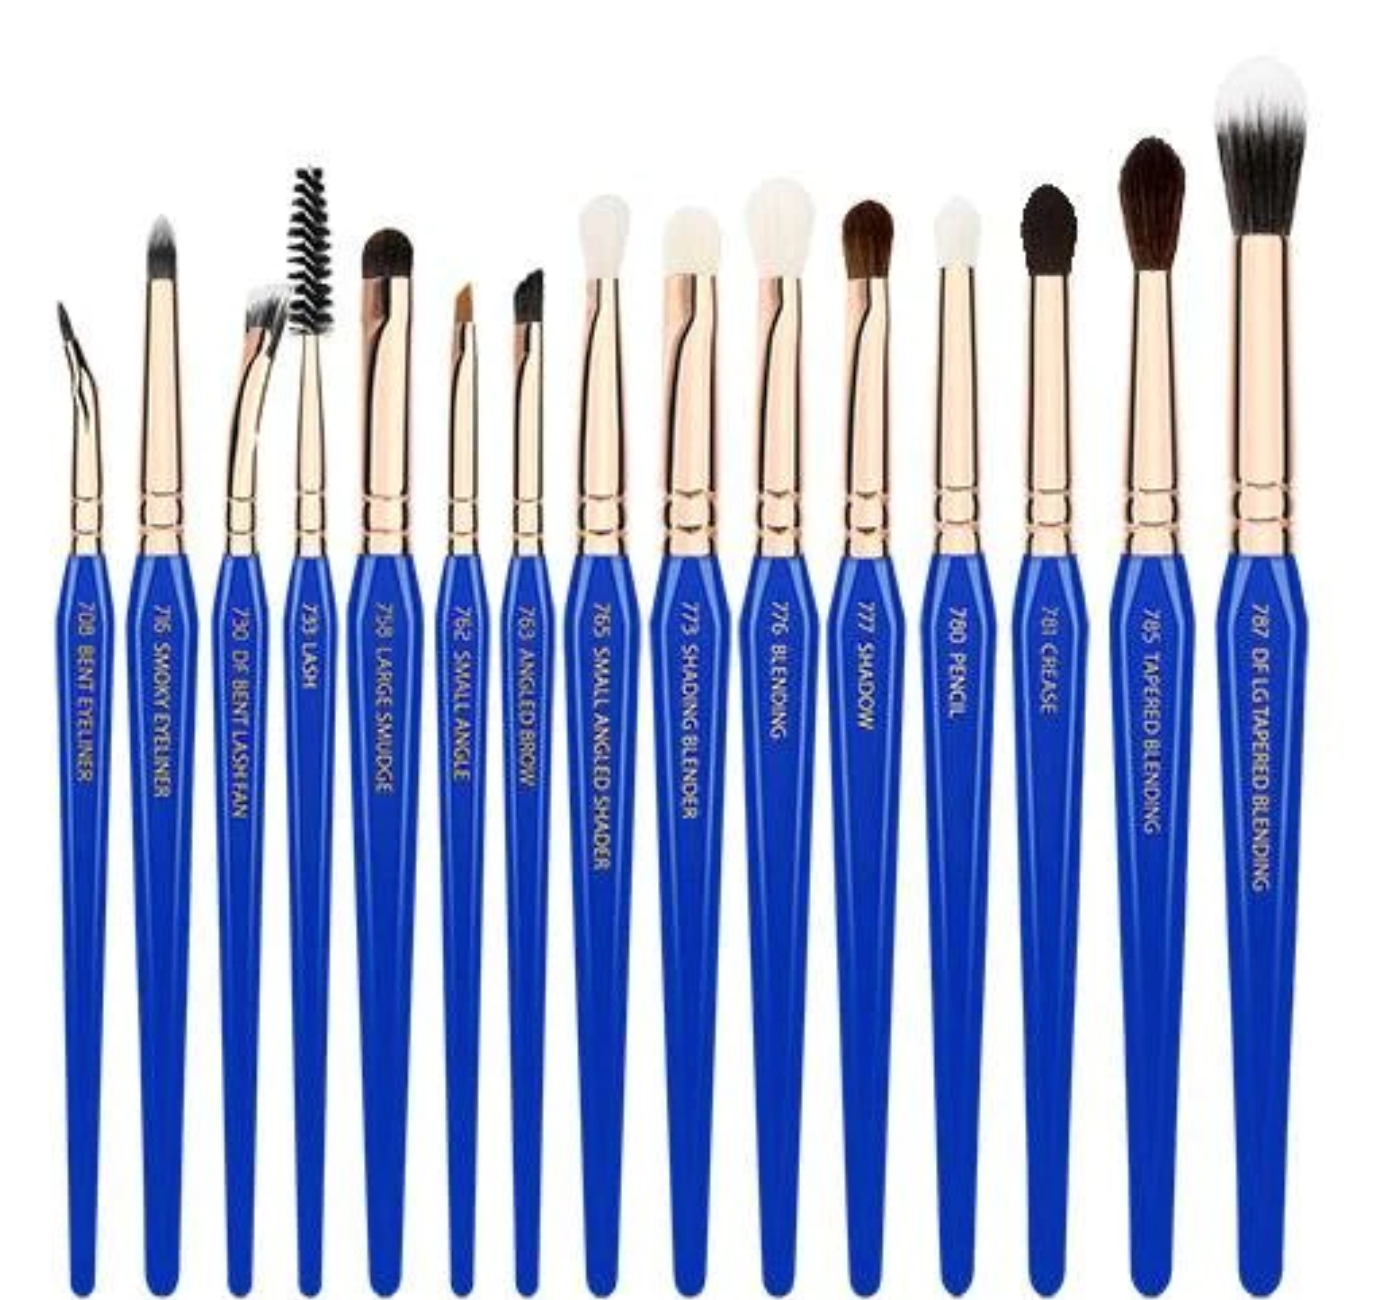 【EYES ONLY】デリウムツールズ ゴールデントライアングル目元コンプリート 5本セット（ポーチ付） ｜bdellium tools GOLDEN TRIANGLE EYES ONLY COMPLETE 15PC. SET1